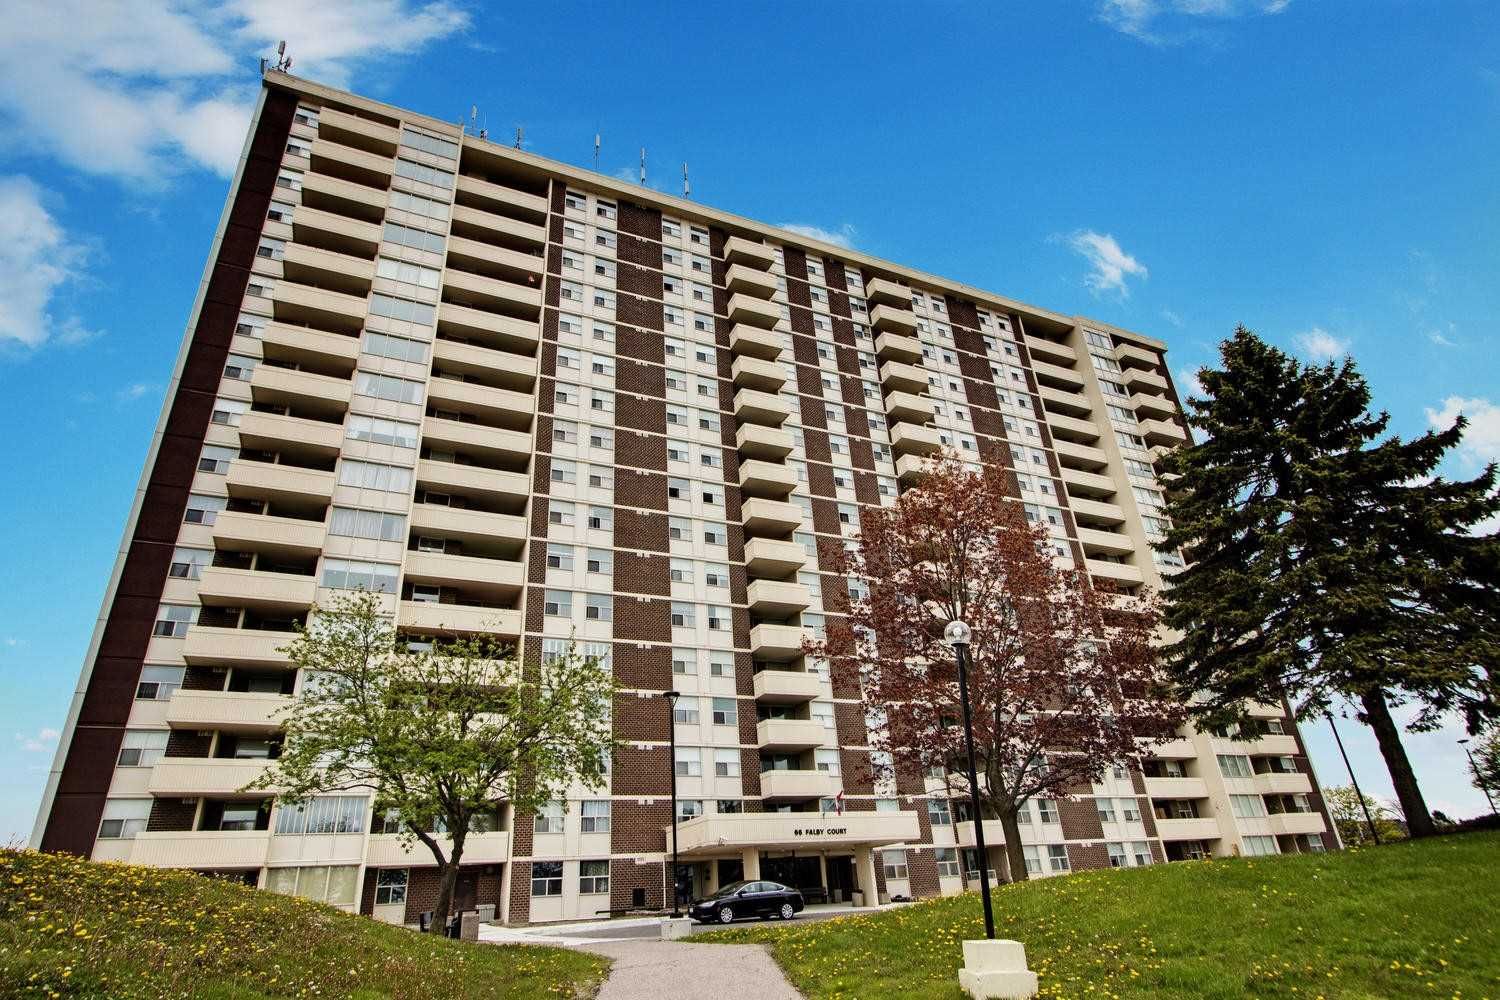 66 Falby Court. 66 Falby Court Condos is located in  Ajax, Toronto